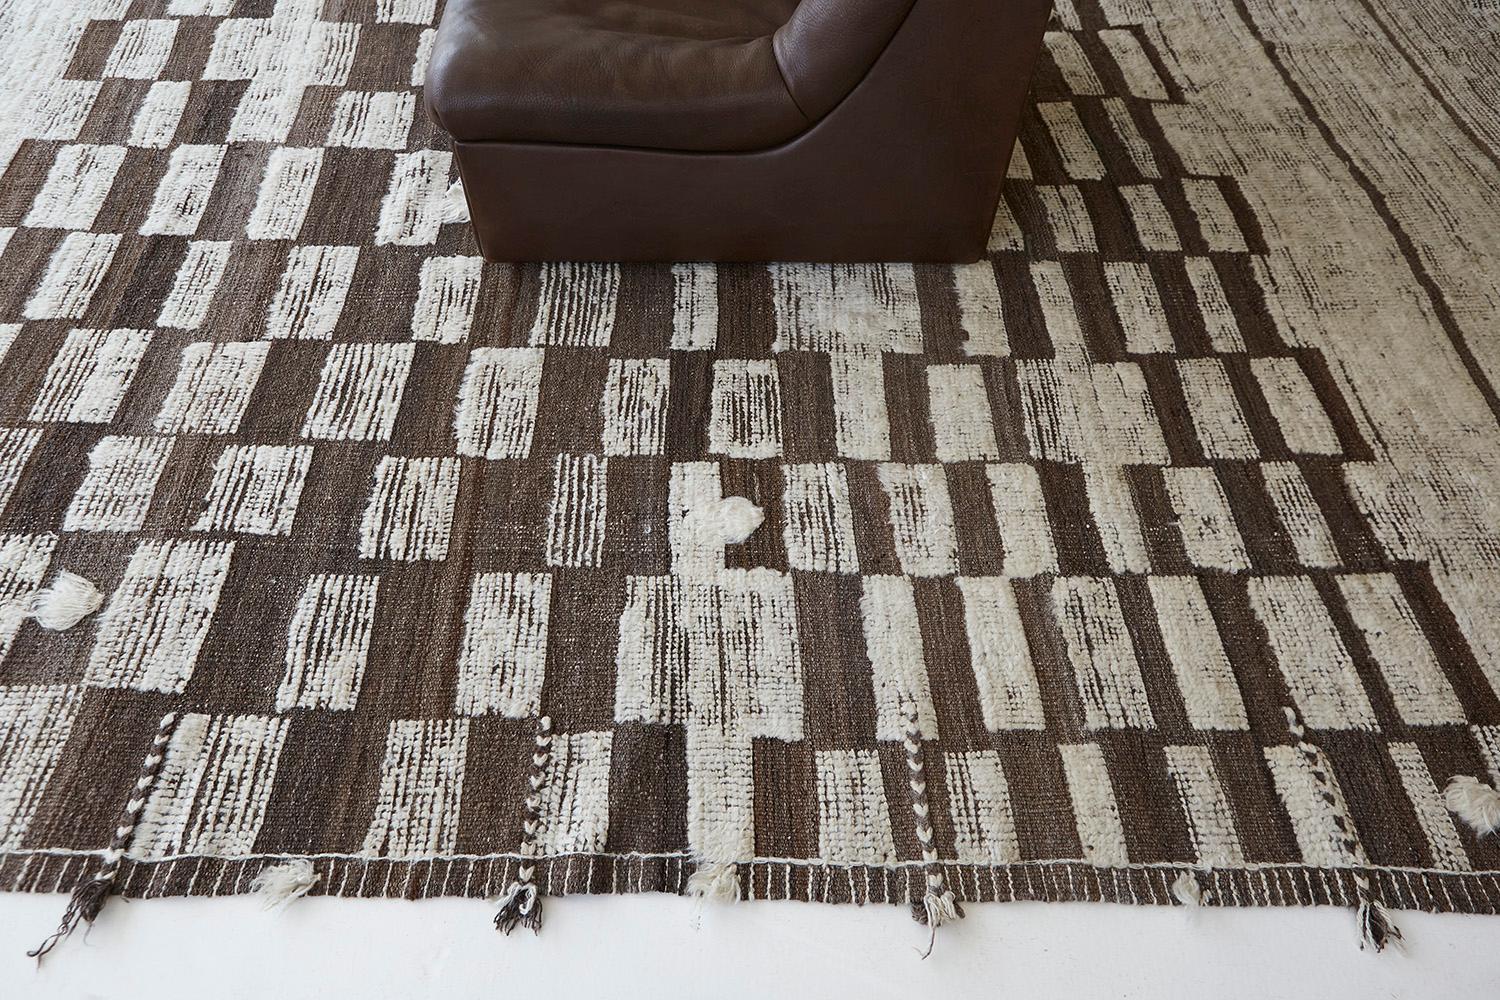 Sirocco' is a stunning hand-woven ivory rug with embossed detailing in a checkered pattern atop a natural gray pile weave. Beautiful tassels and bordered designs add a timely and one-of-a-kind essence for the modern design world. Haute Bohemian